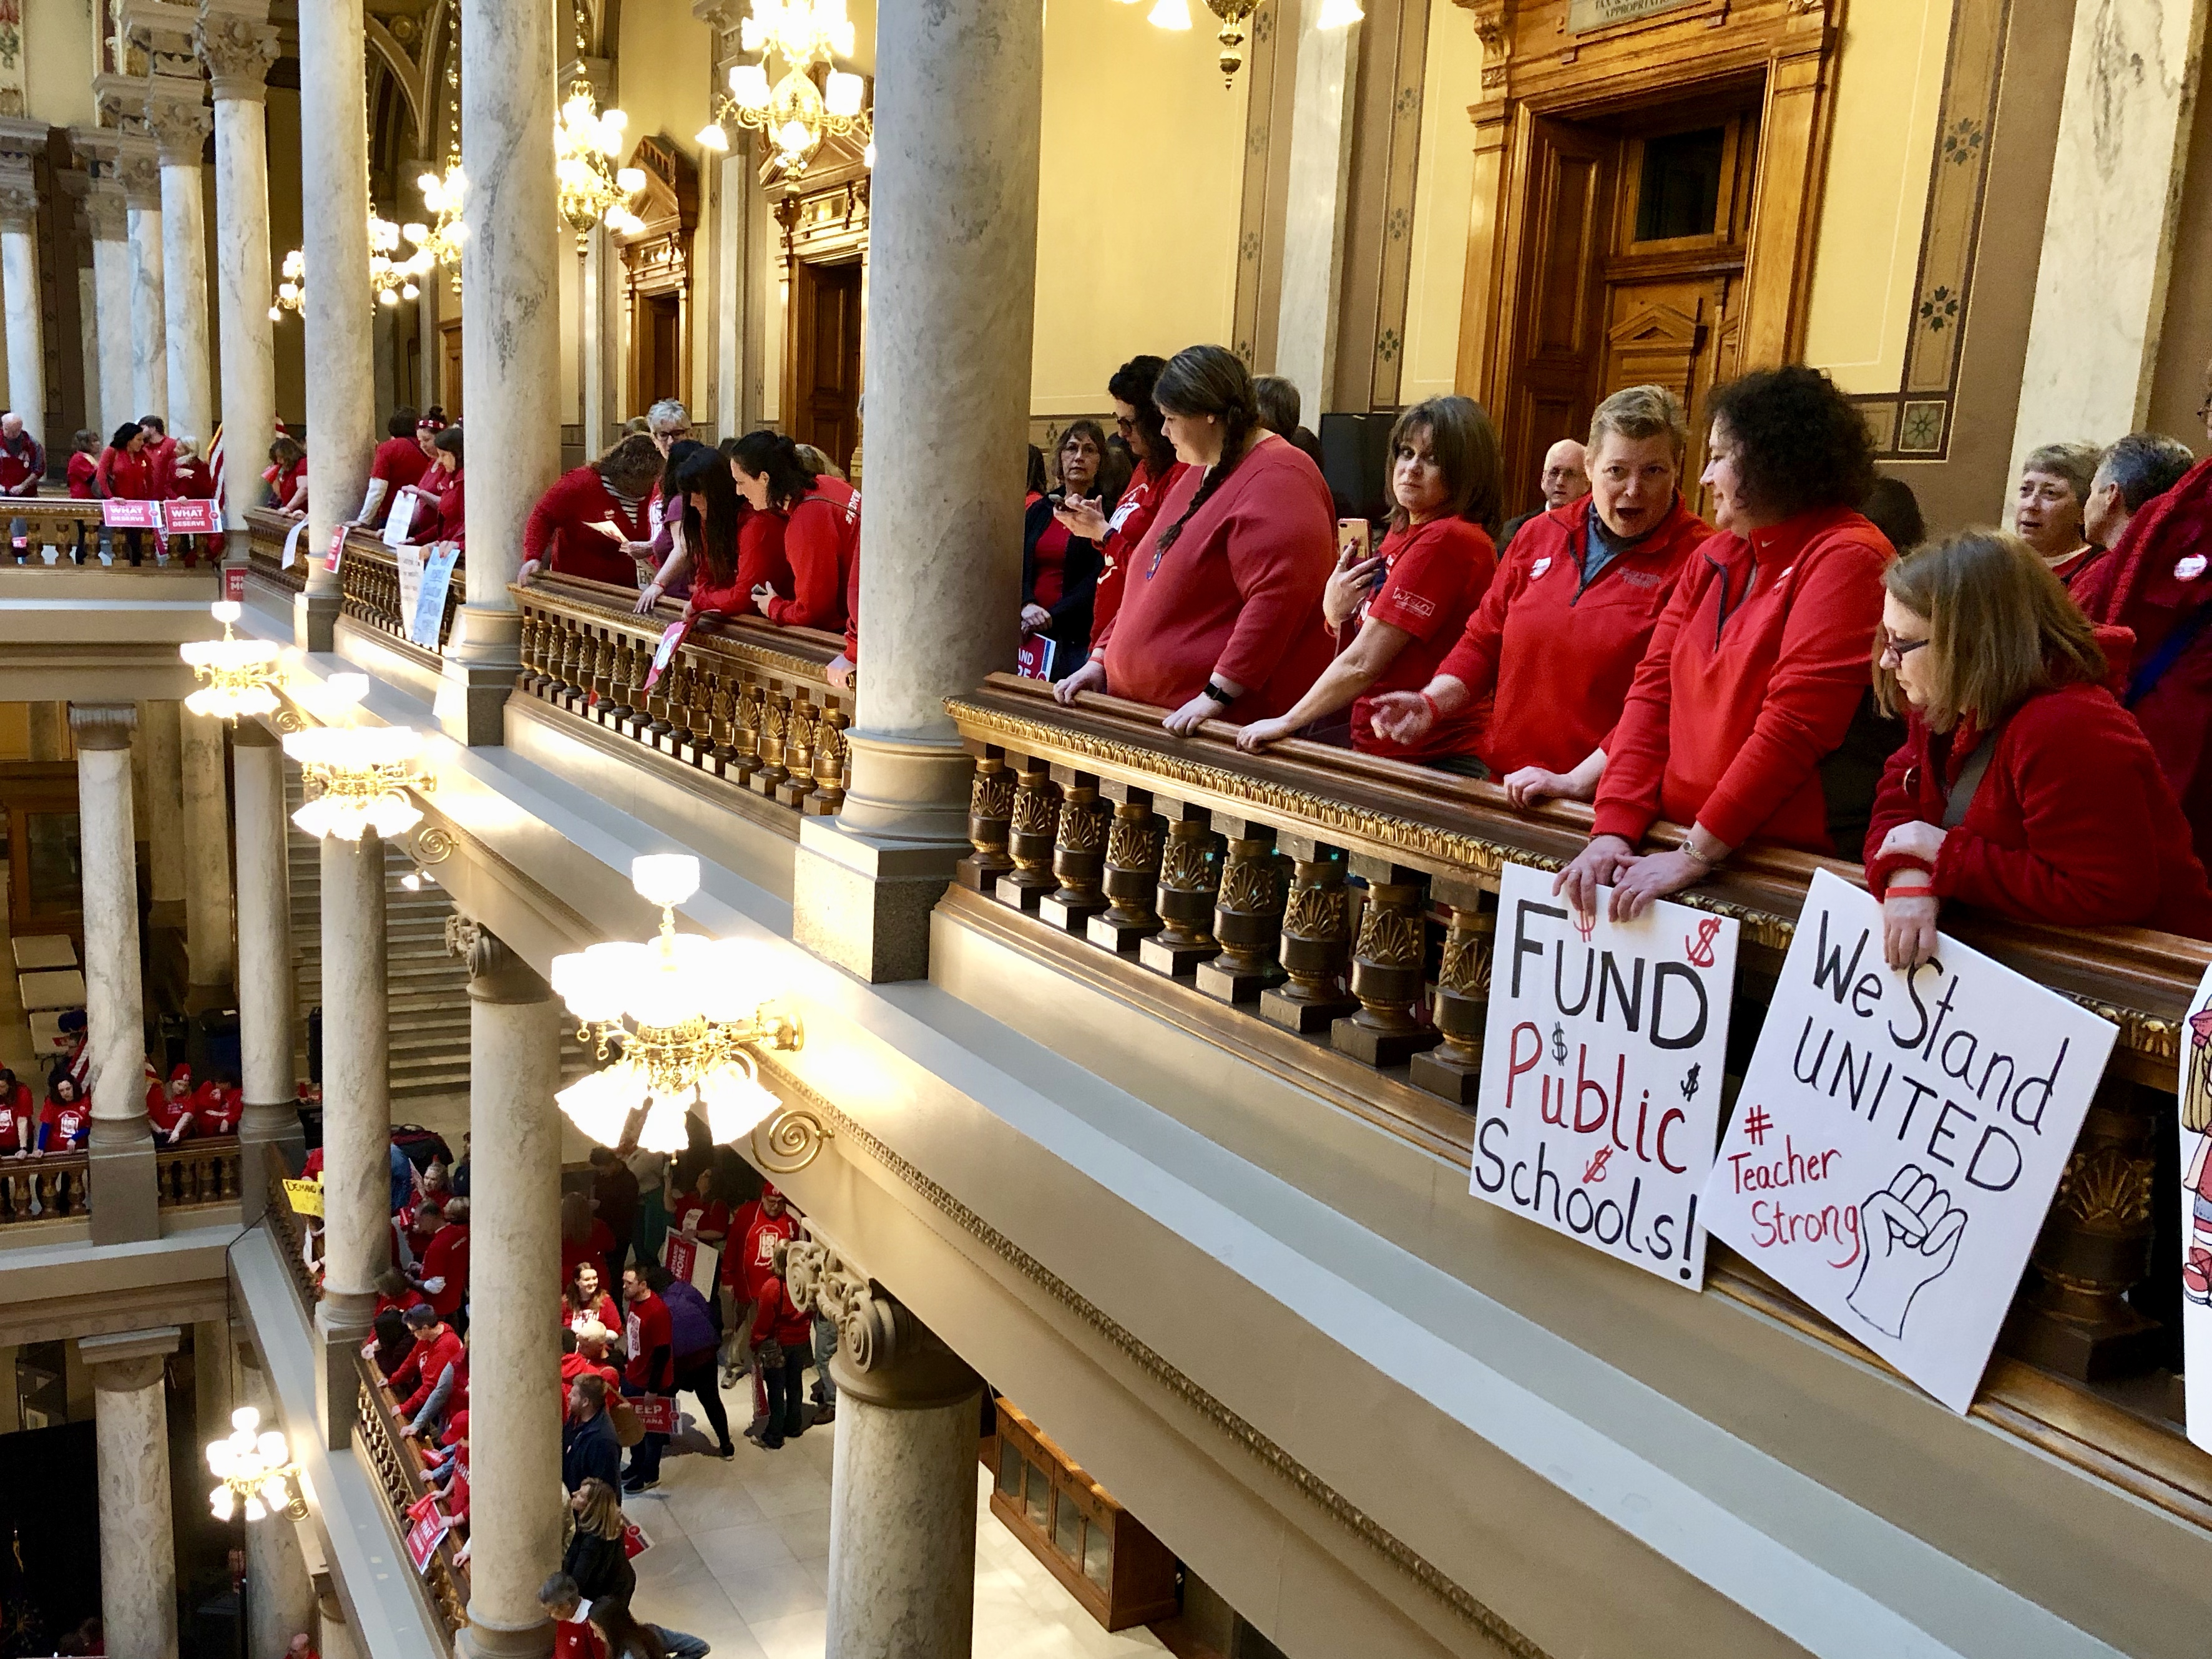 A row of teachers wearing red stand in the balcony of the state Capitol on March 9, 2019, at a rally hosted by the Indiana State Teachers Association. Two hold placards saying “Fund Public Schools” and “We Stand United.”